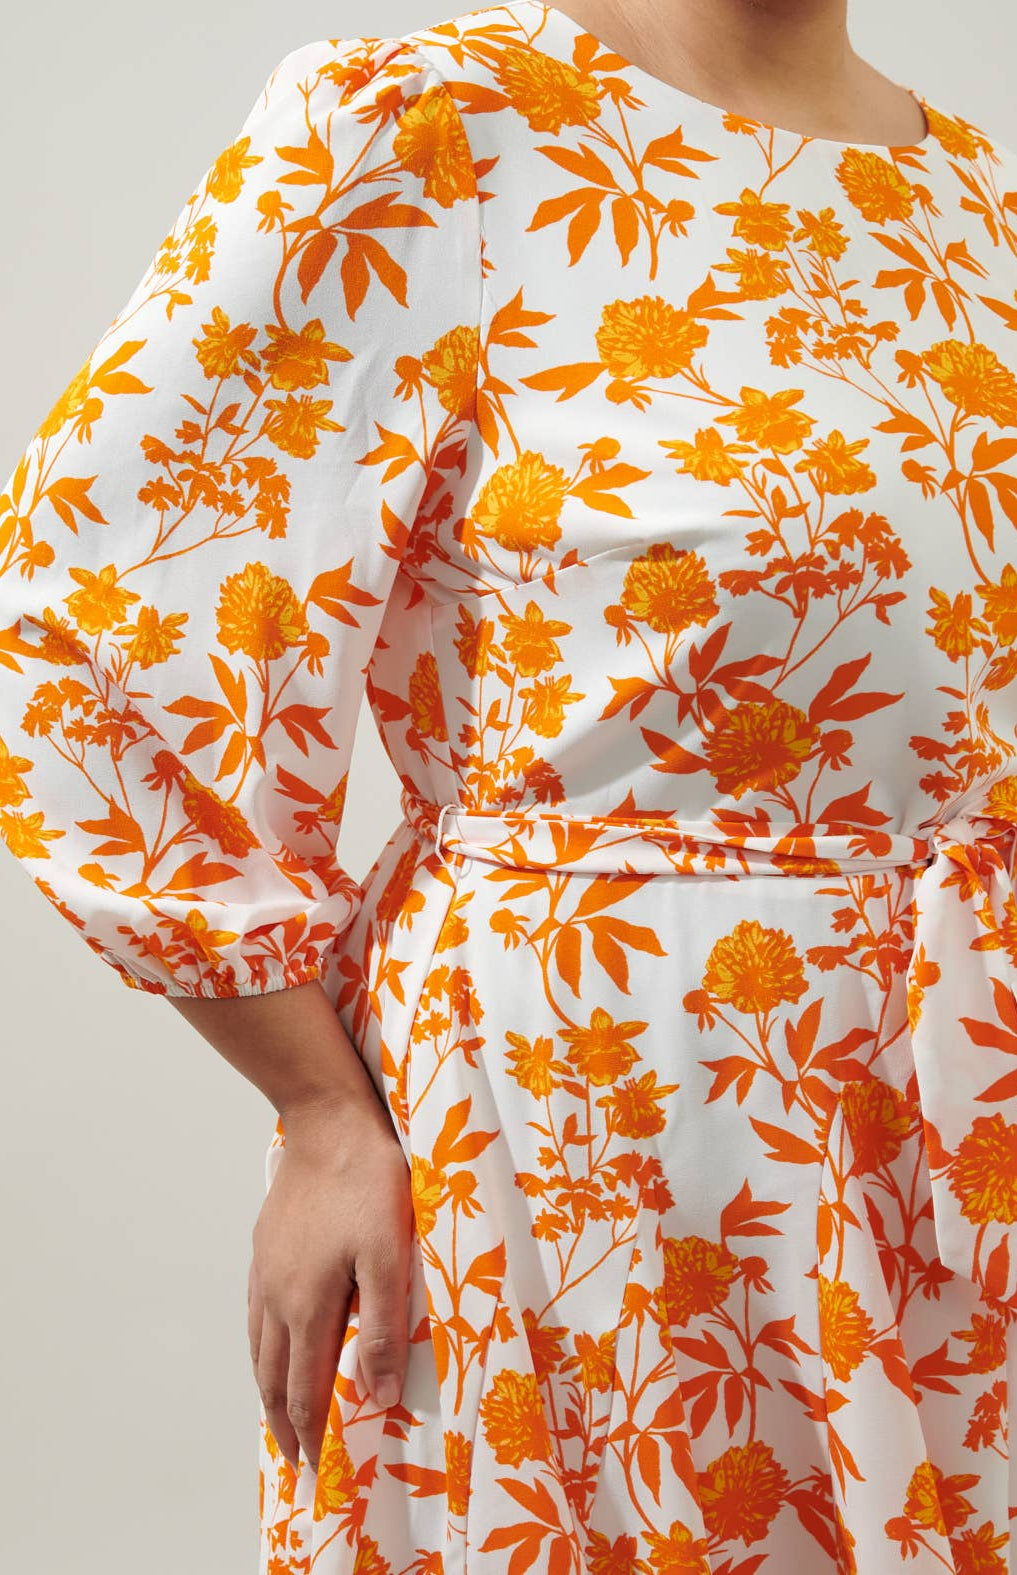 Plus Size Manzanilla Floral Collins Godet Mini Dress in Orange and Ivory Cute Hues